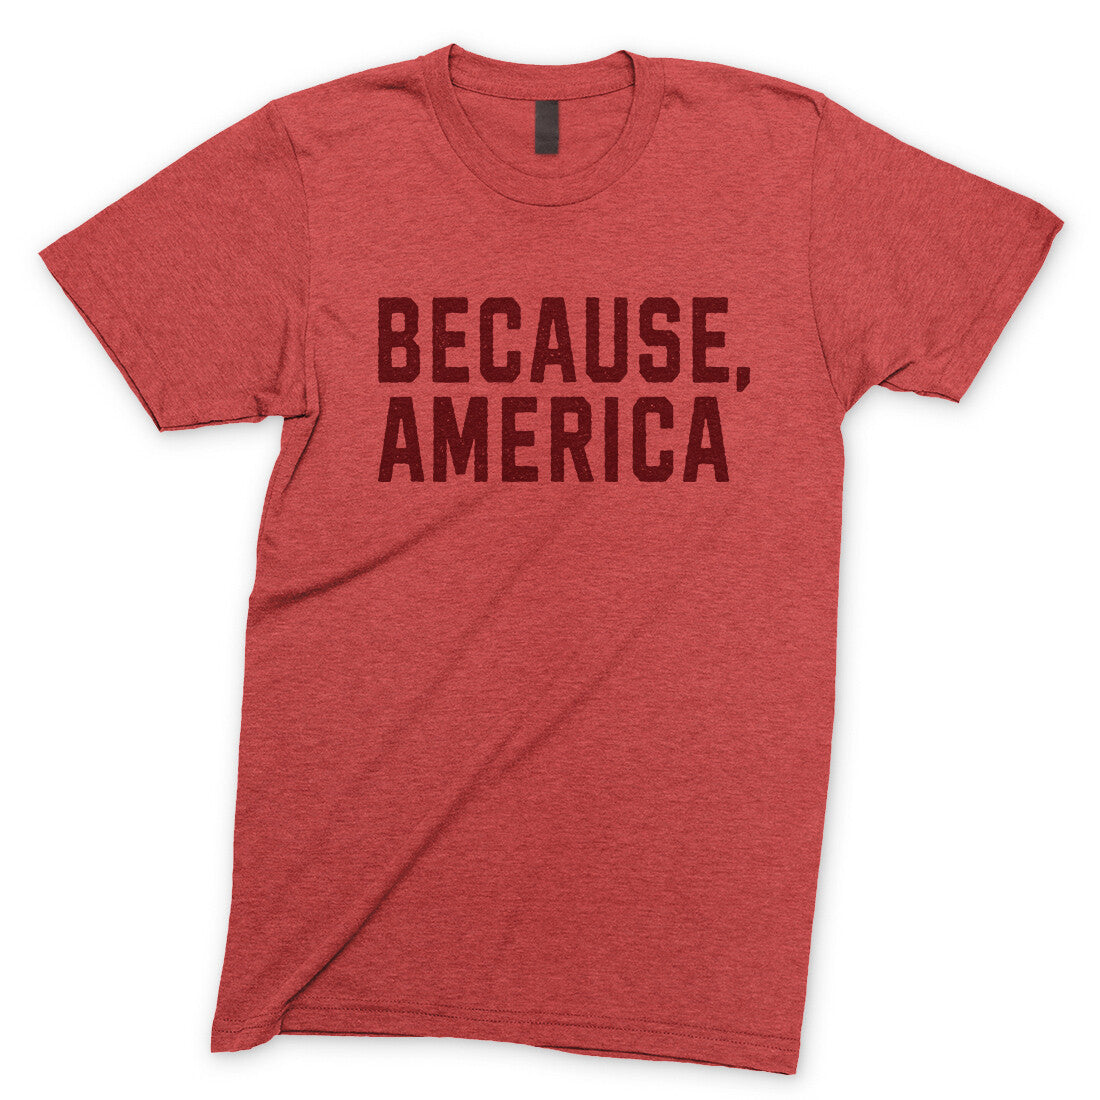 Because America in Heather Red Color